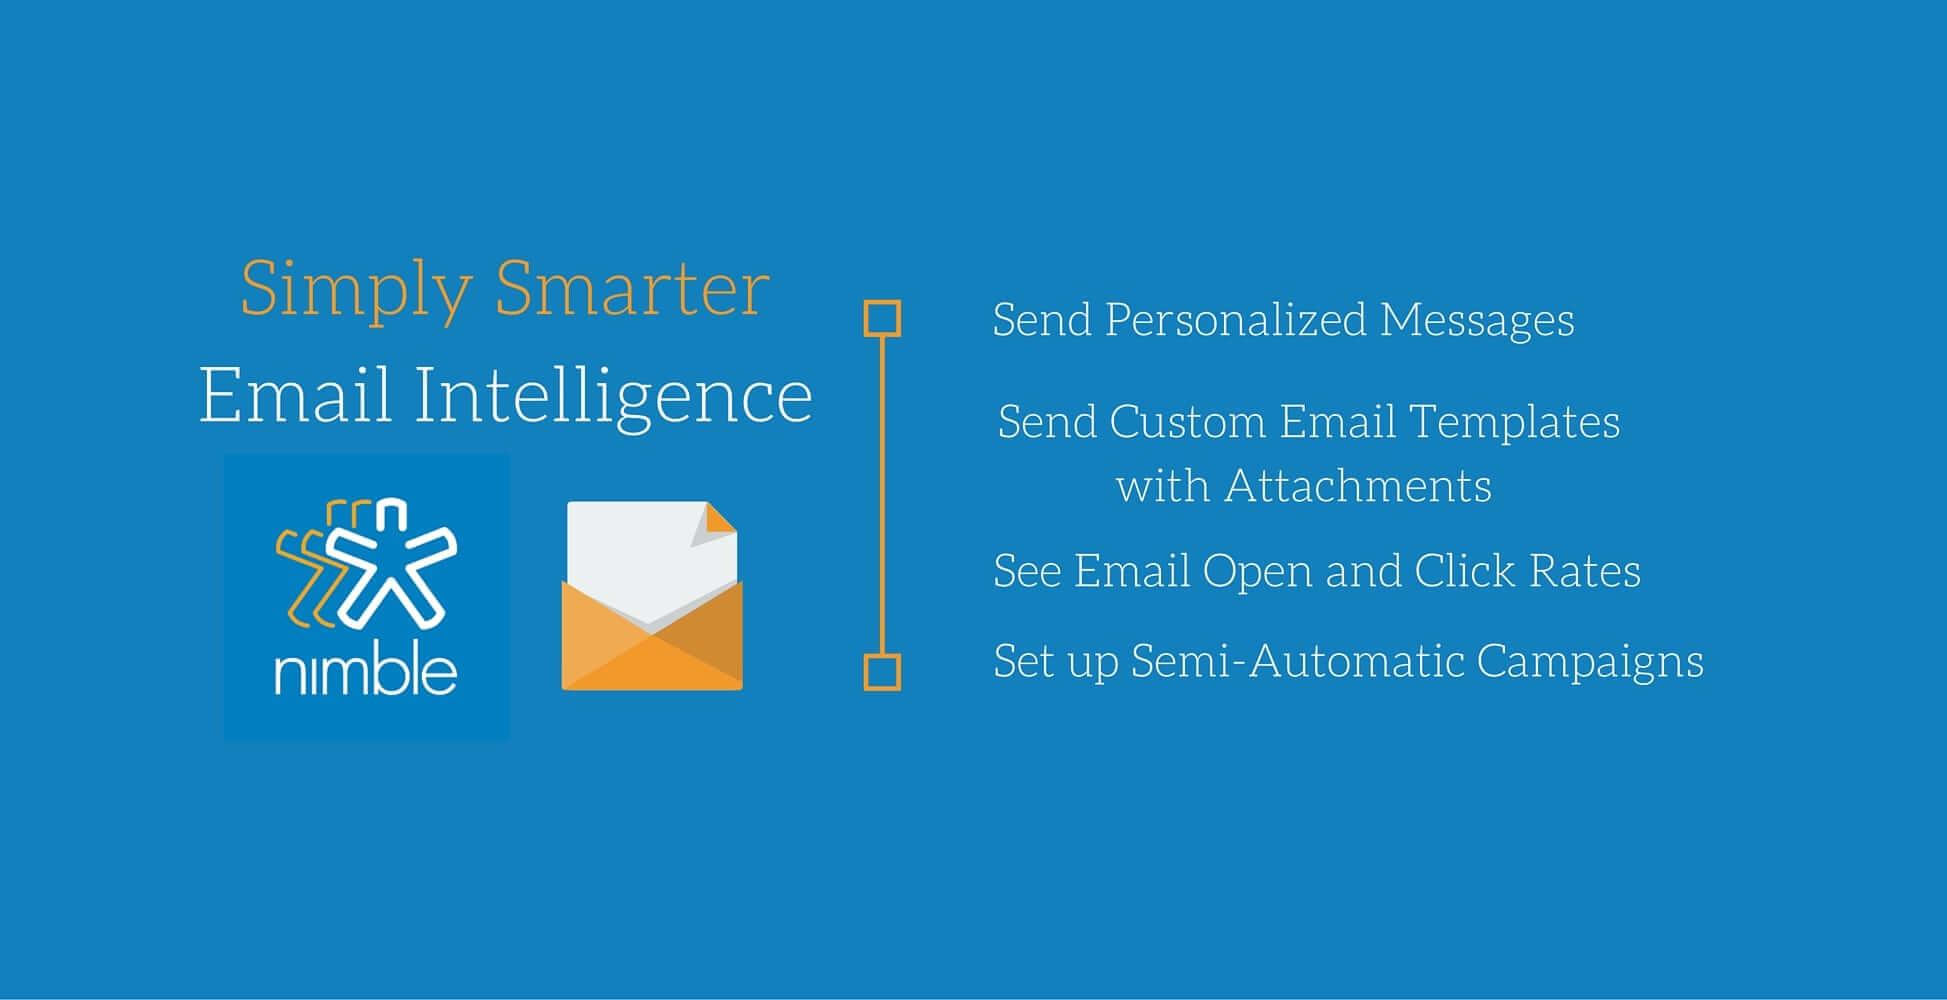 Simply Smarter Email Intelligence